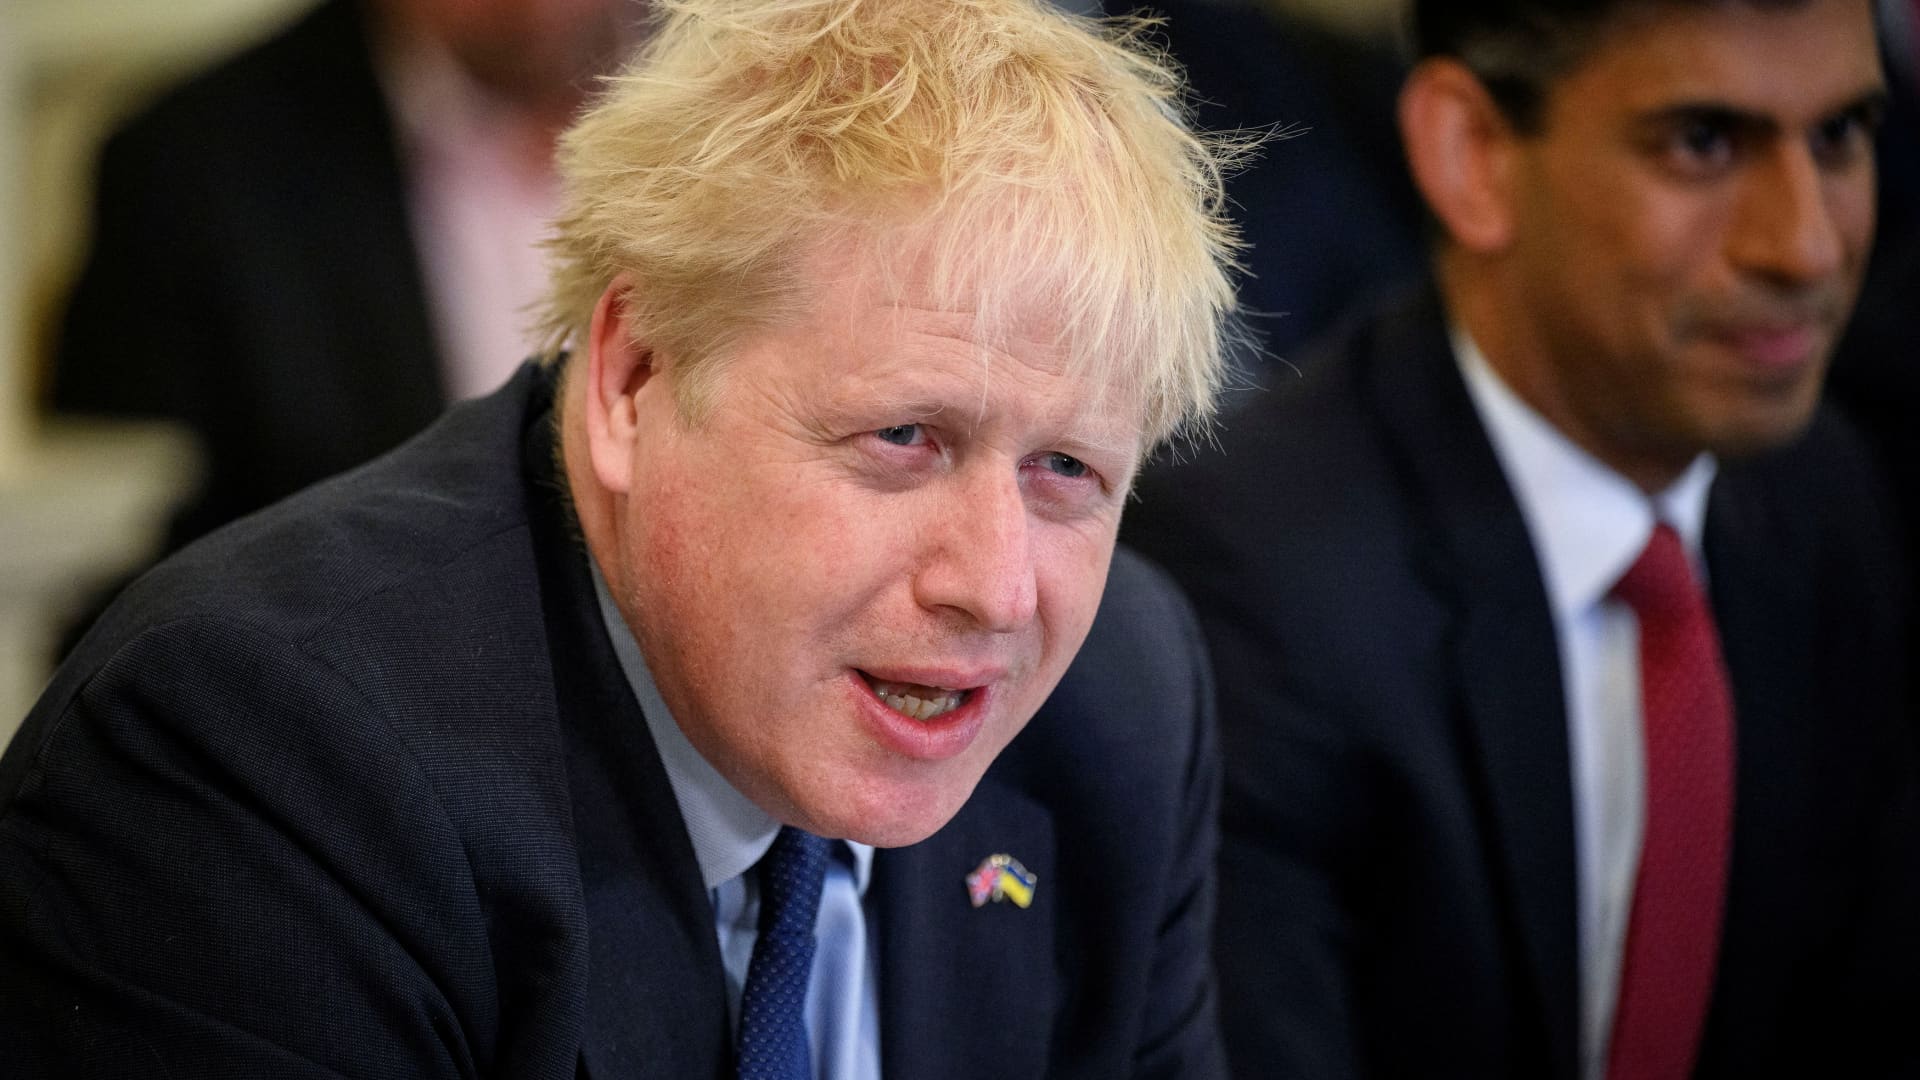 Double blow for UK’s Boris Johnson as he loses two key by-elections